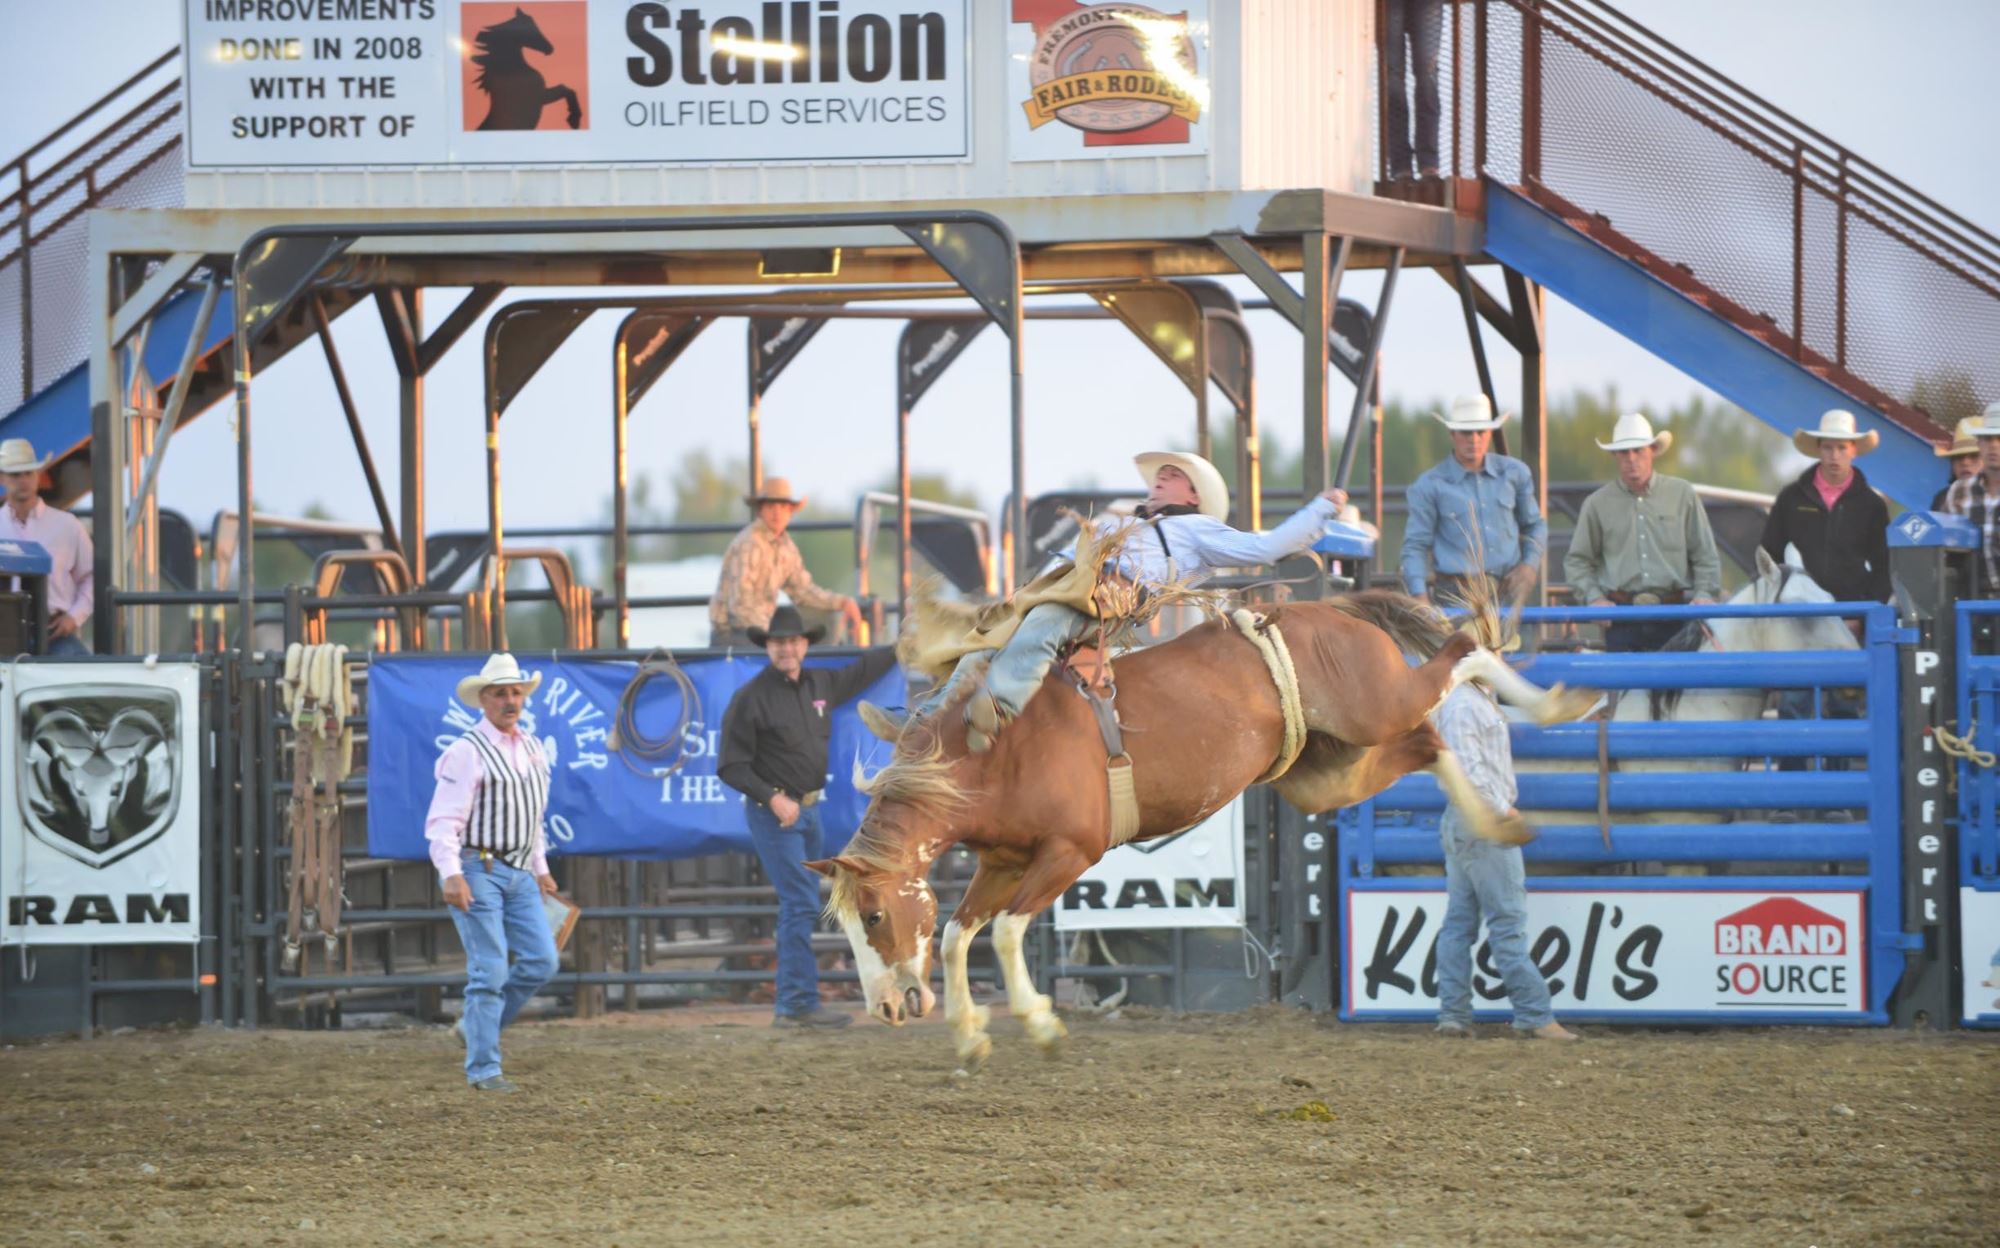 110th Annual Fremont County Fair and Rodeo